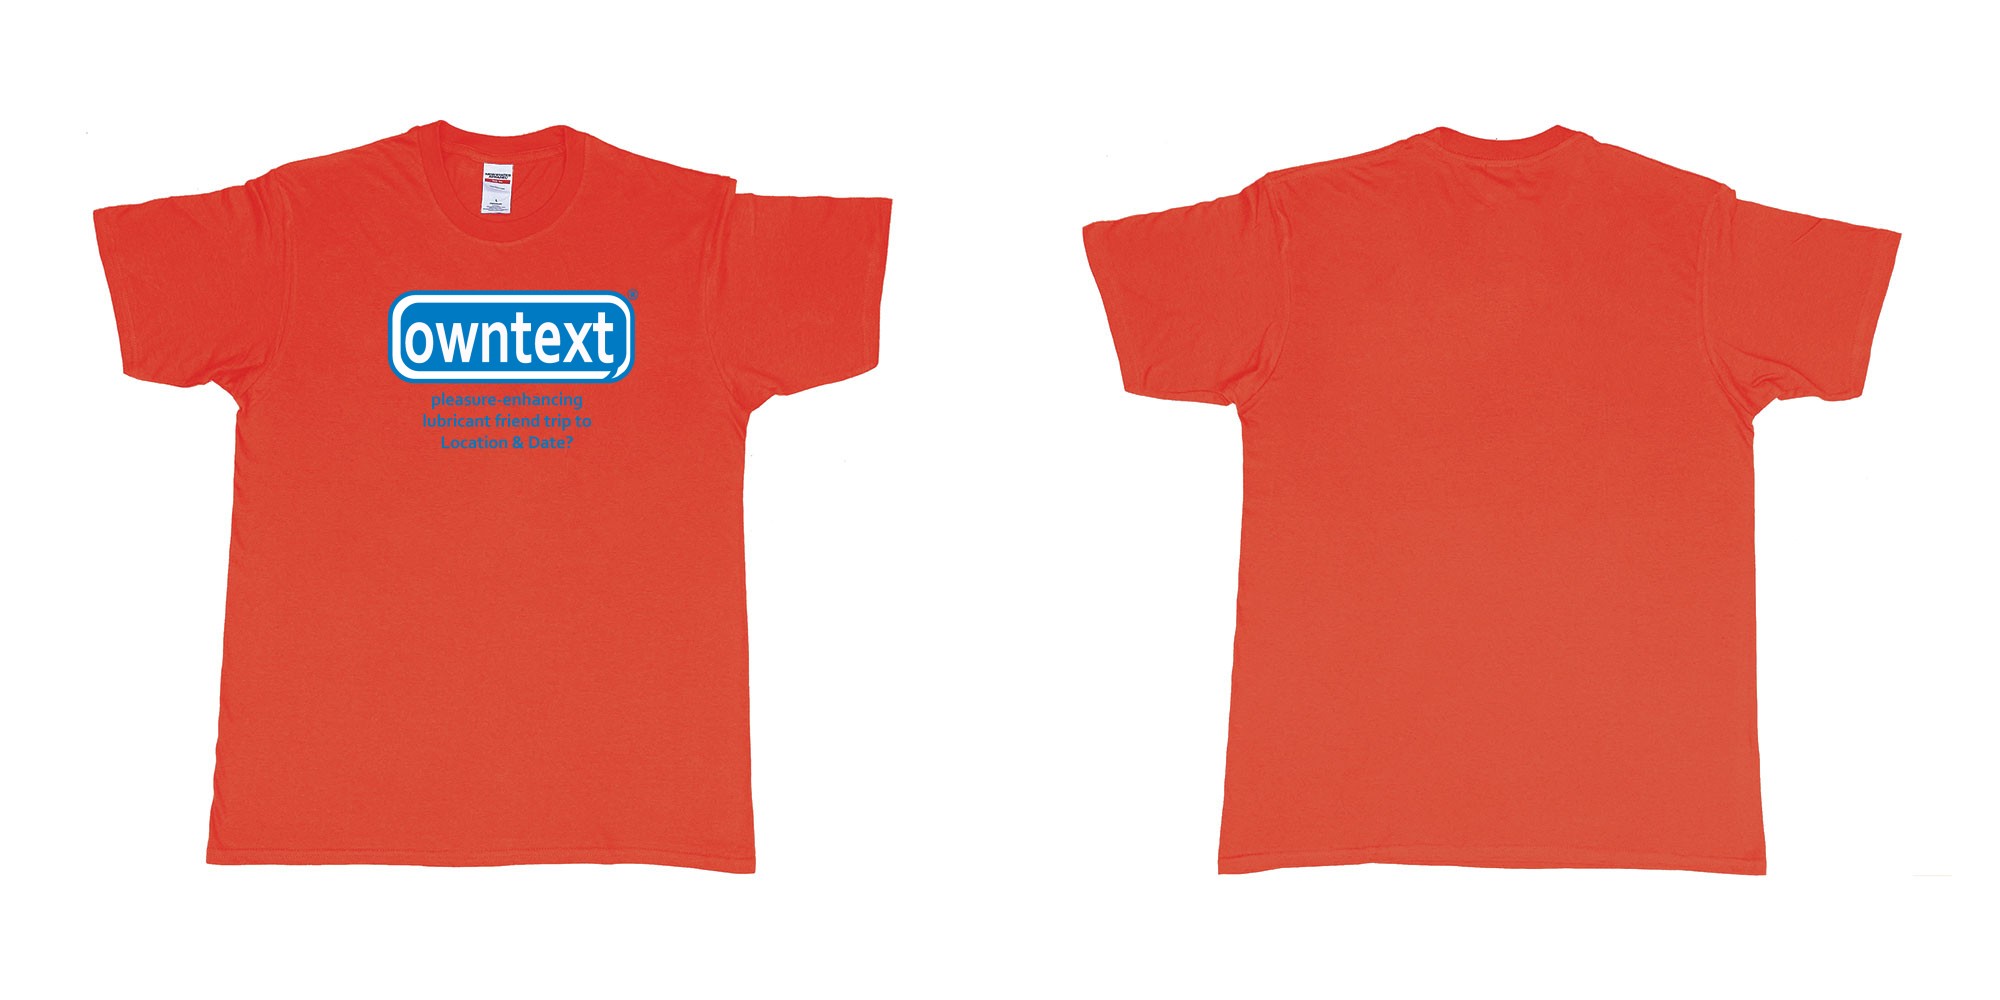 Custom tshirt design Durex in fabric color red choice your own text made in Bali by The Pirate Way